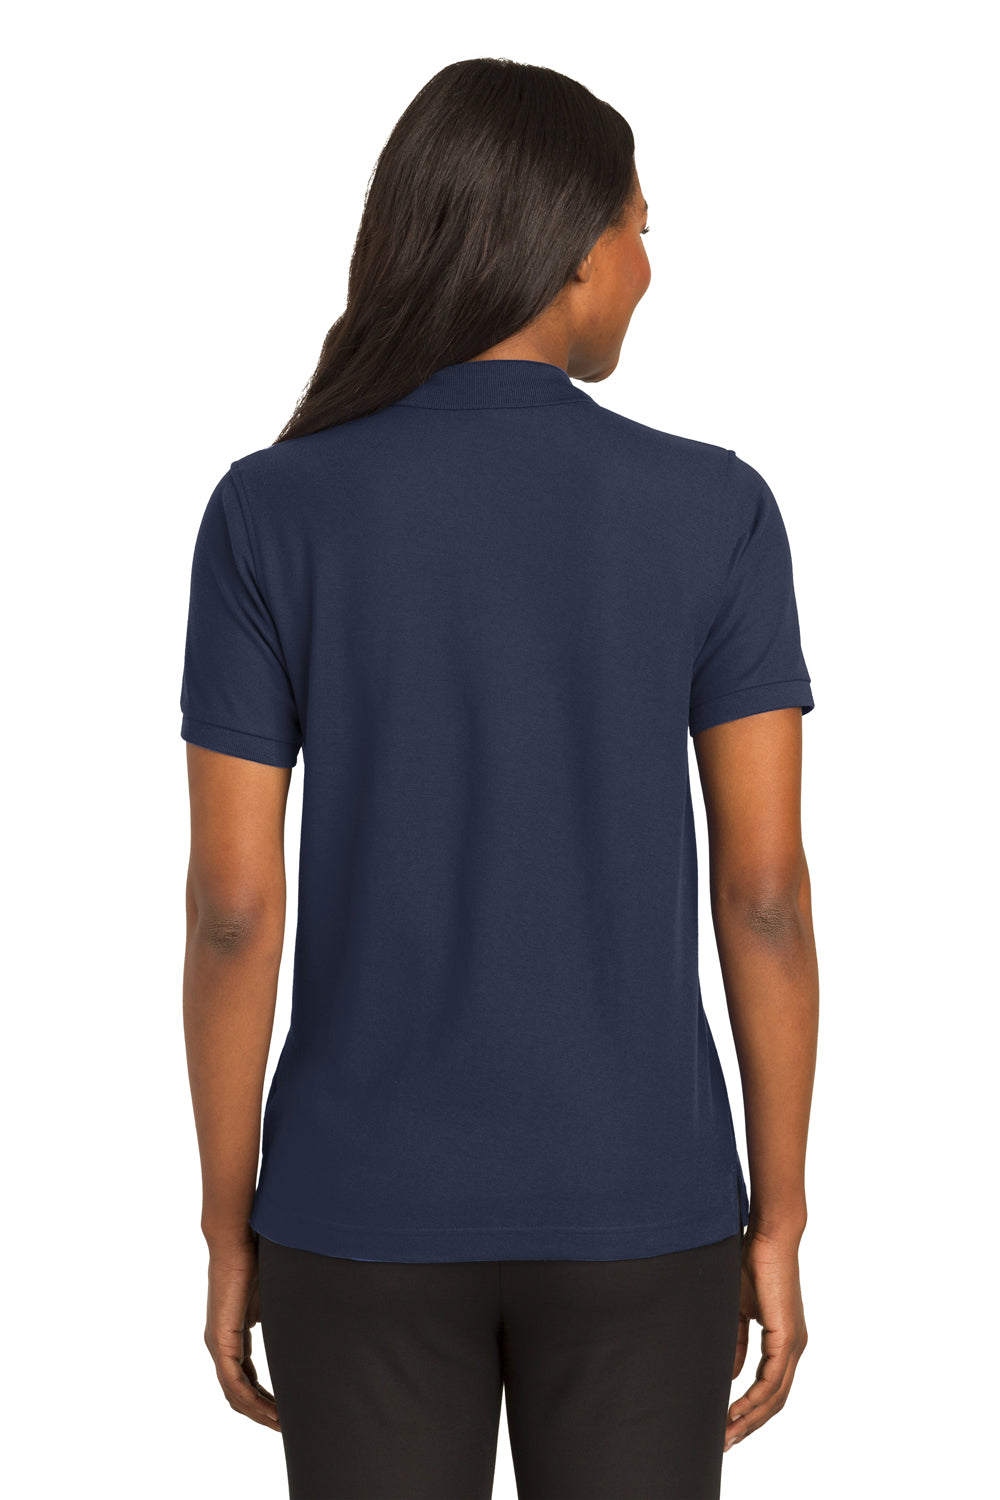 Port Authority L500 Womens Silk Touch Wrinkle Resistant Short Sleeve Polo Shirt Navy Blue Back